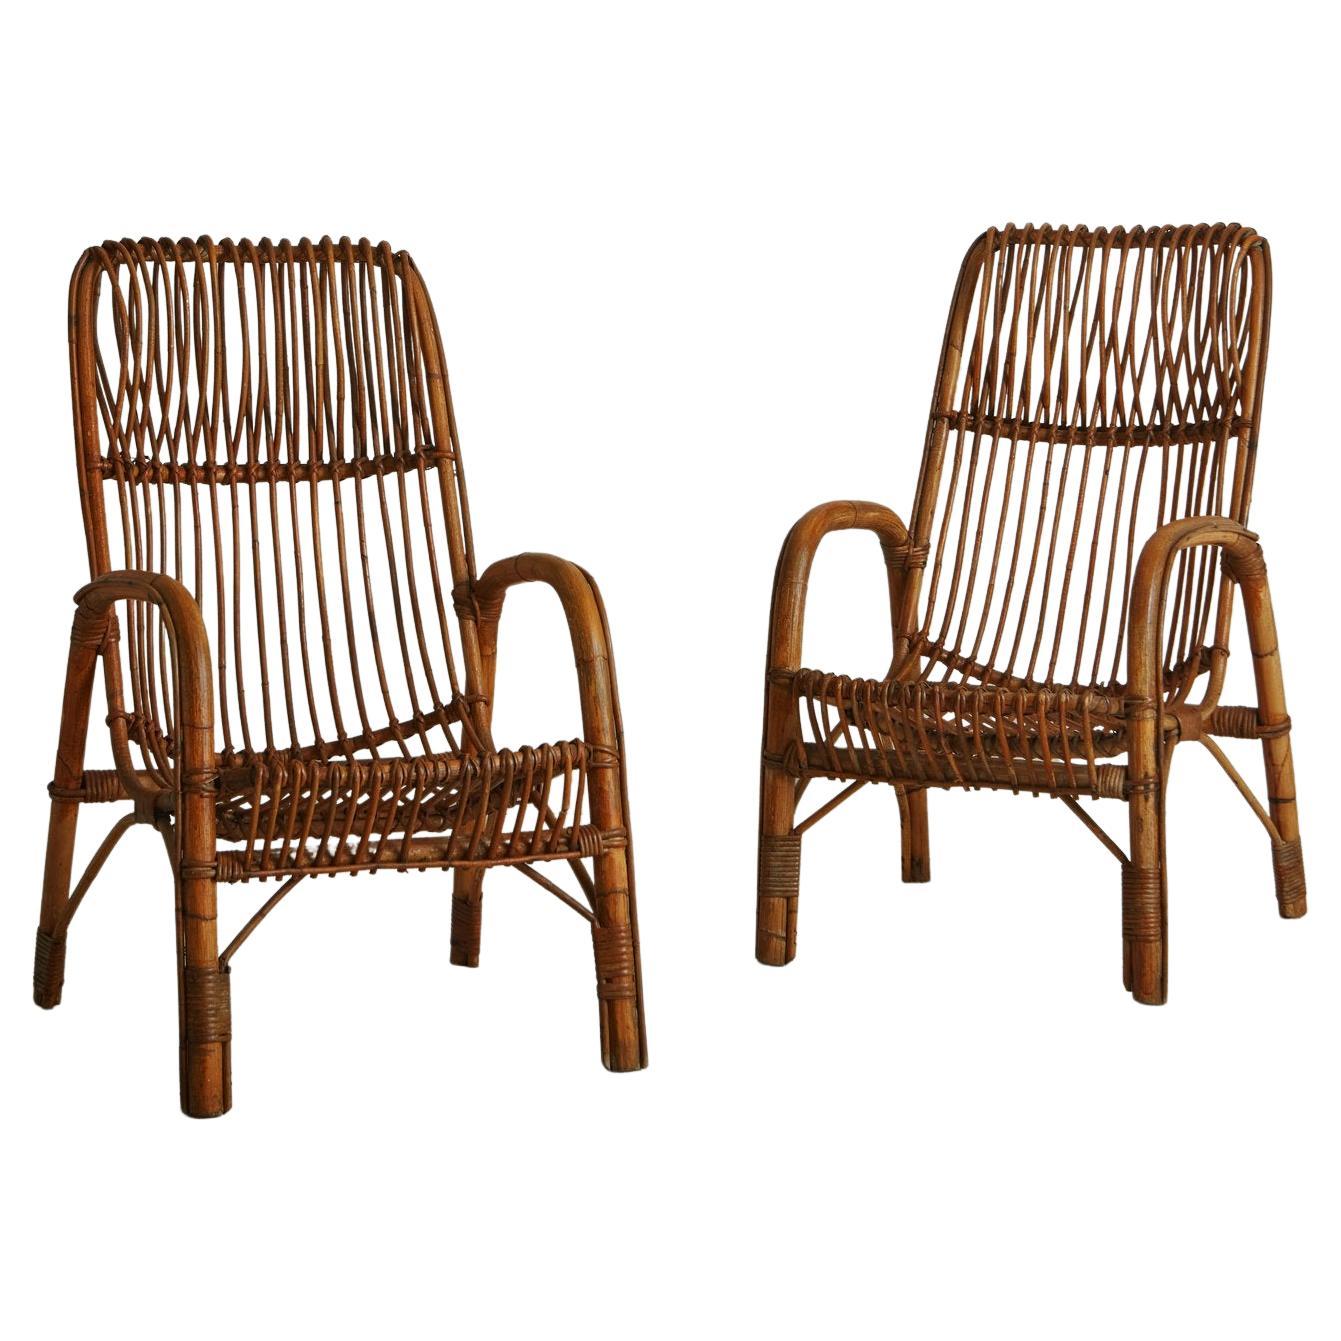 Pair of Bamboo + Rattan Lounge Chairs, Italy, 1960s